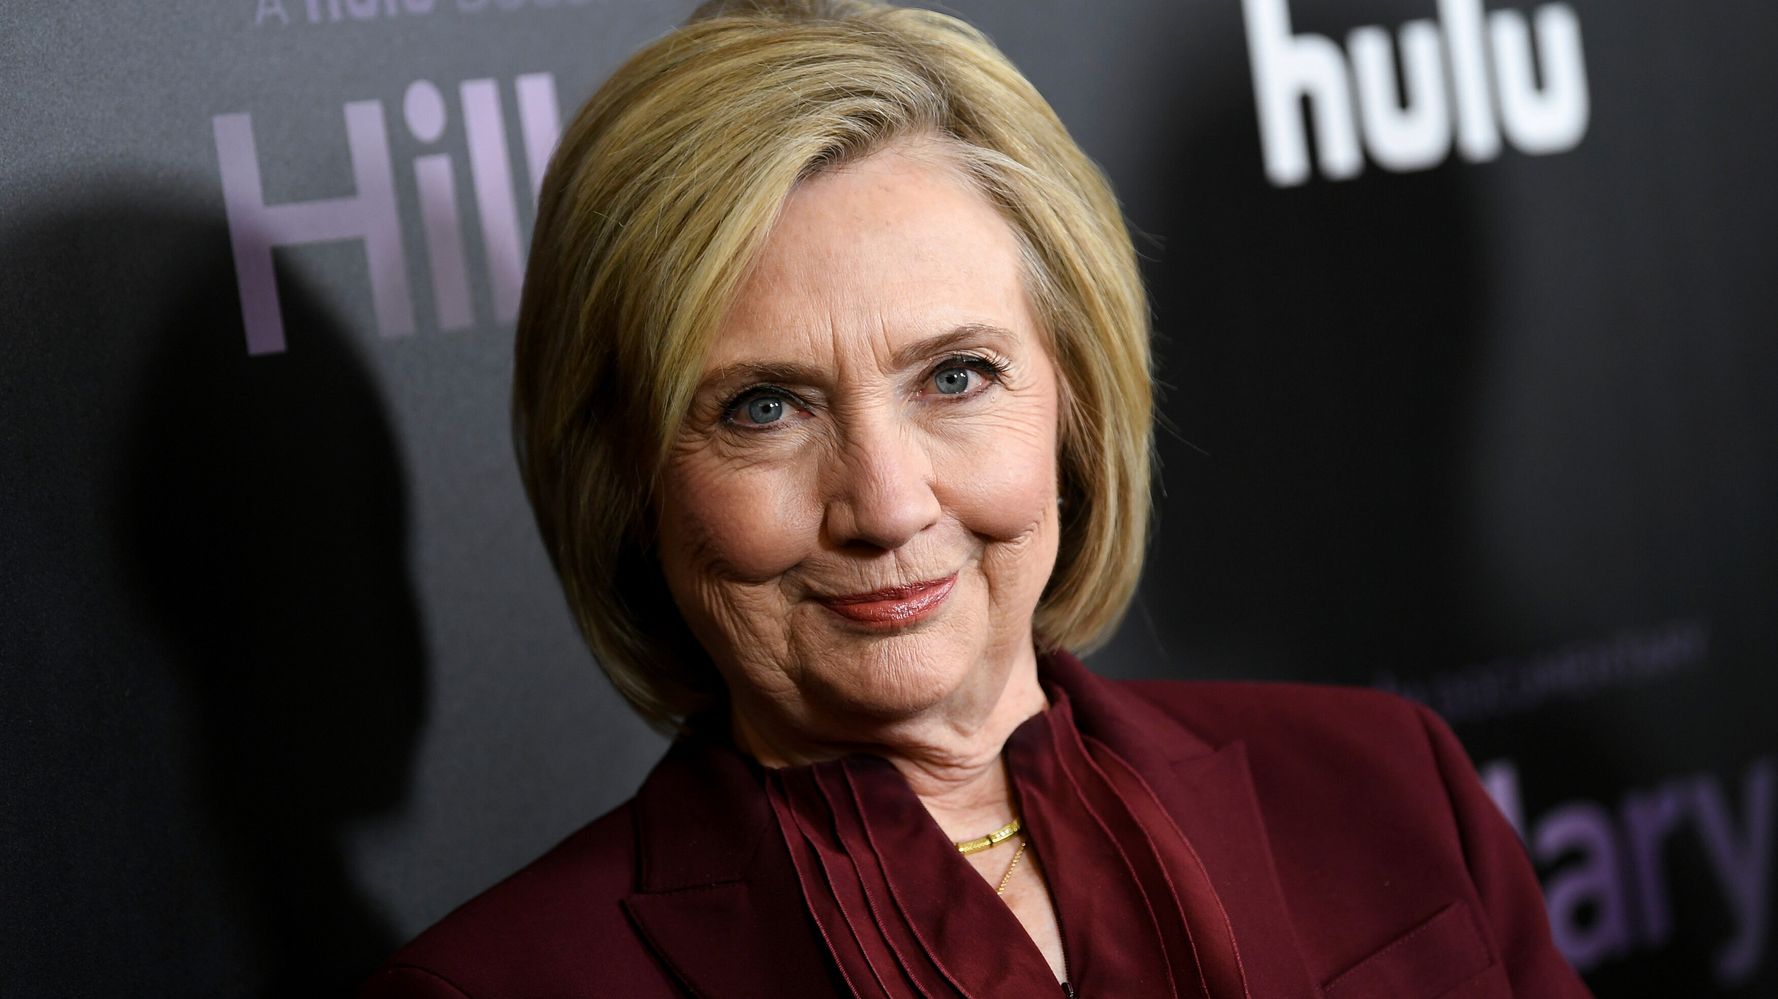 Hillary Clinton To Voice The Giant In Arkansas Production Of 'Into The Woods'